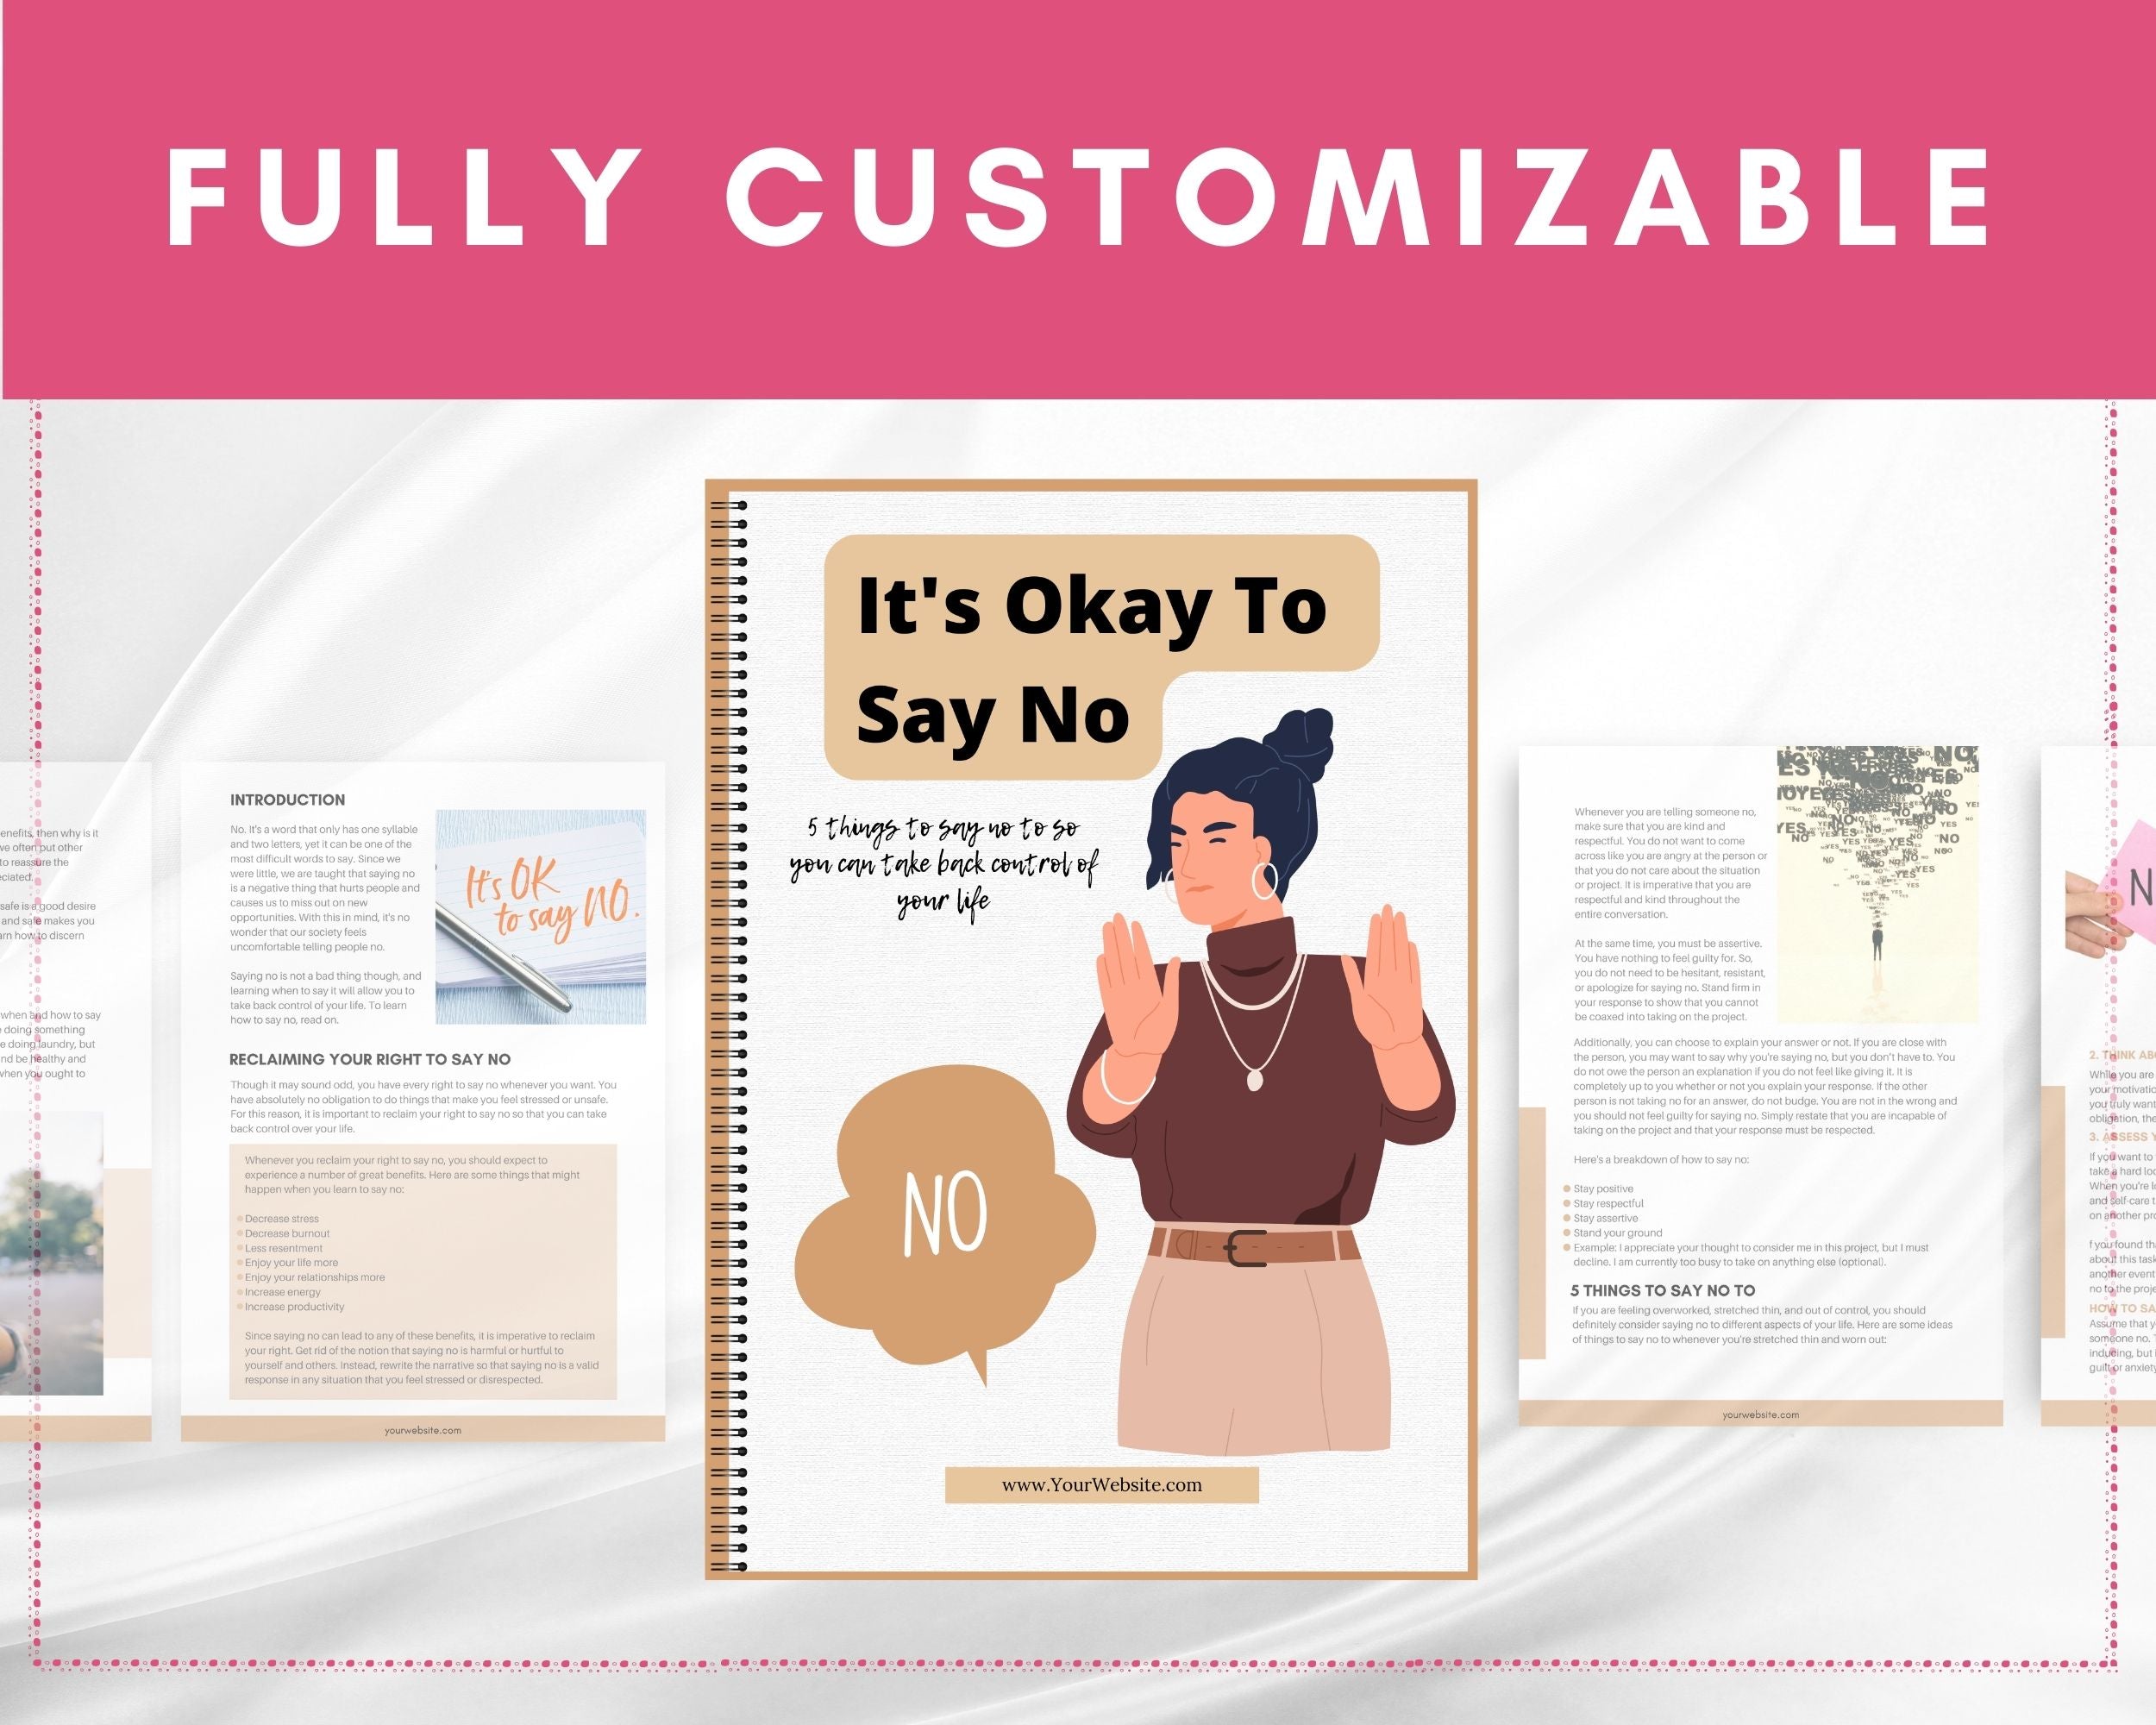 Editable It's Okay to Say No Mini Ebook | Done-for-You Ebook in Canva | Rebrandable and Resizable Canva Template